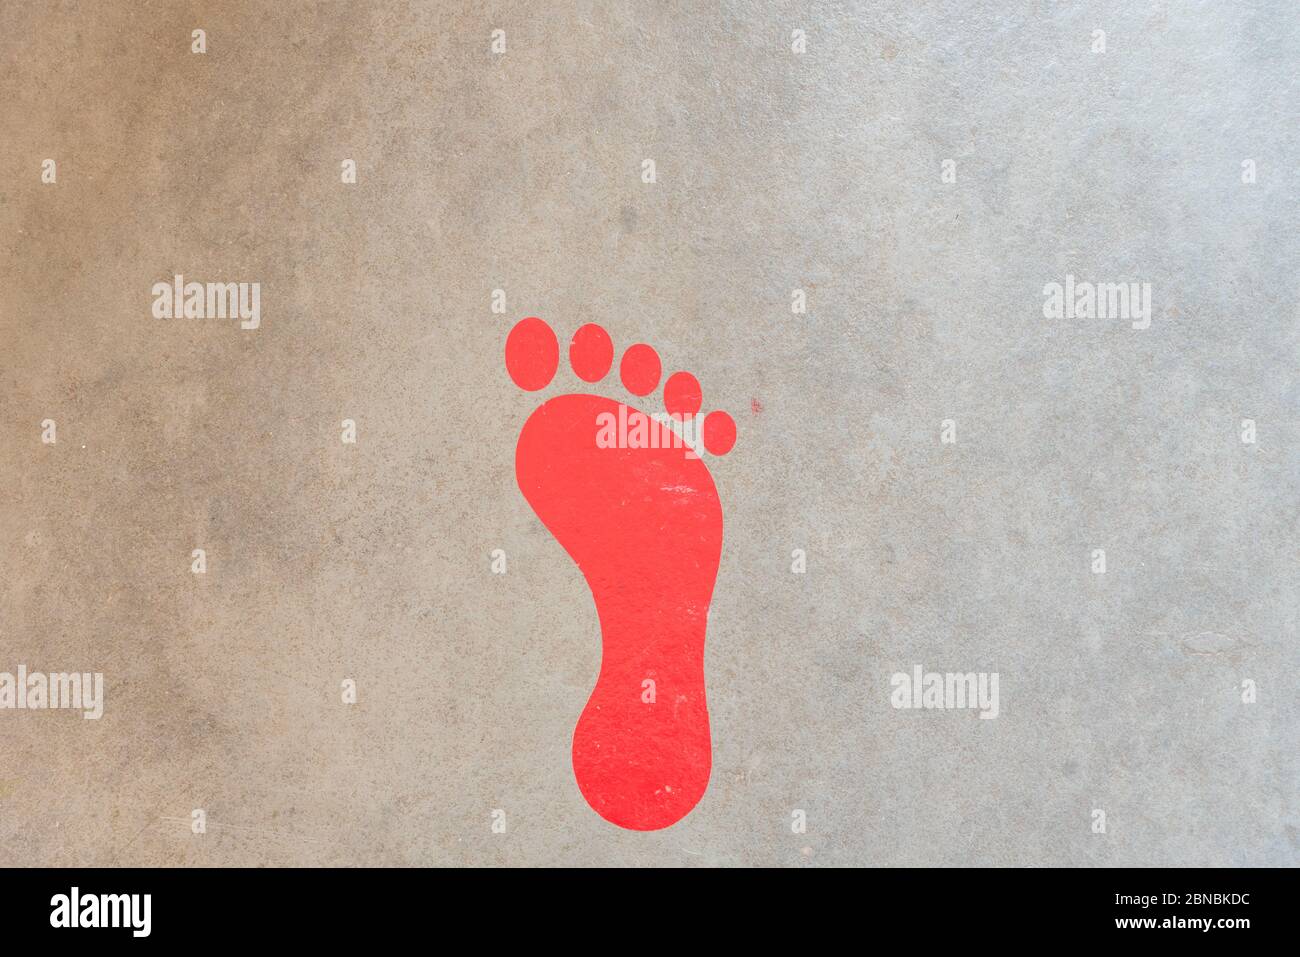 footprint of red person on the floor Stock Photo